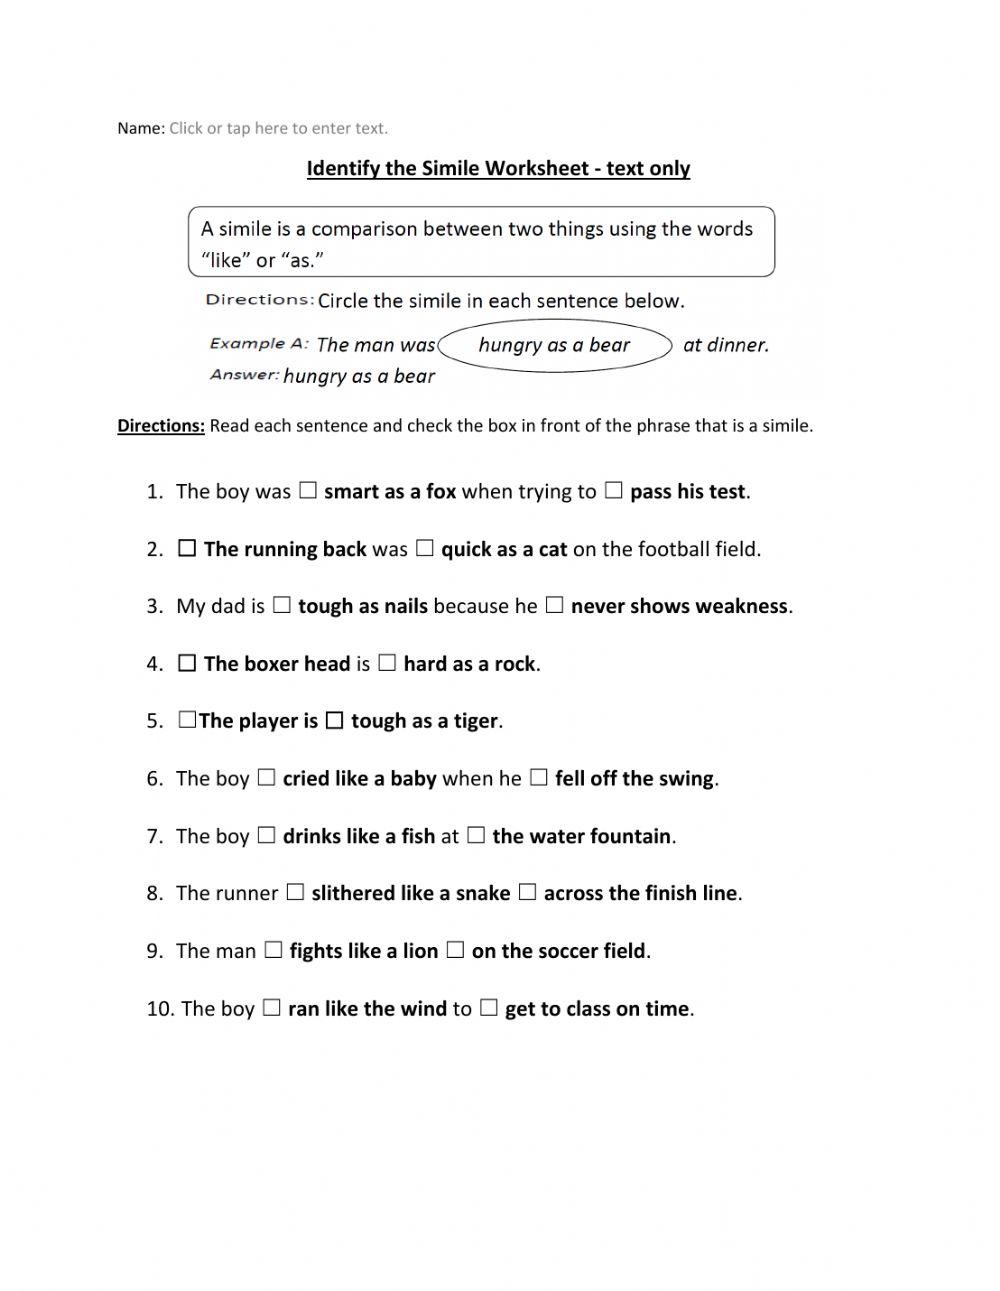 Identify the Simile Worksheet text only